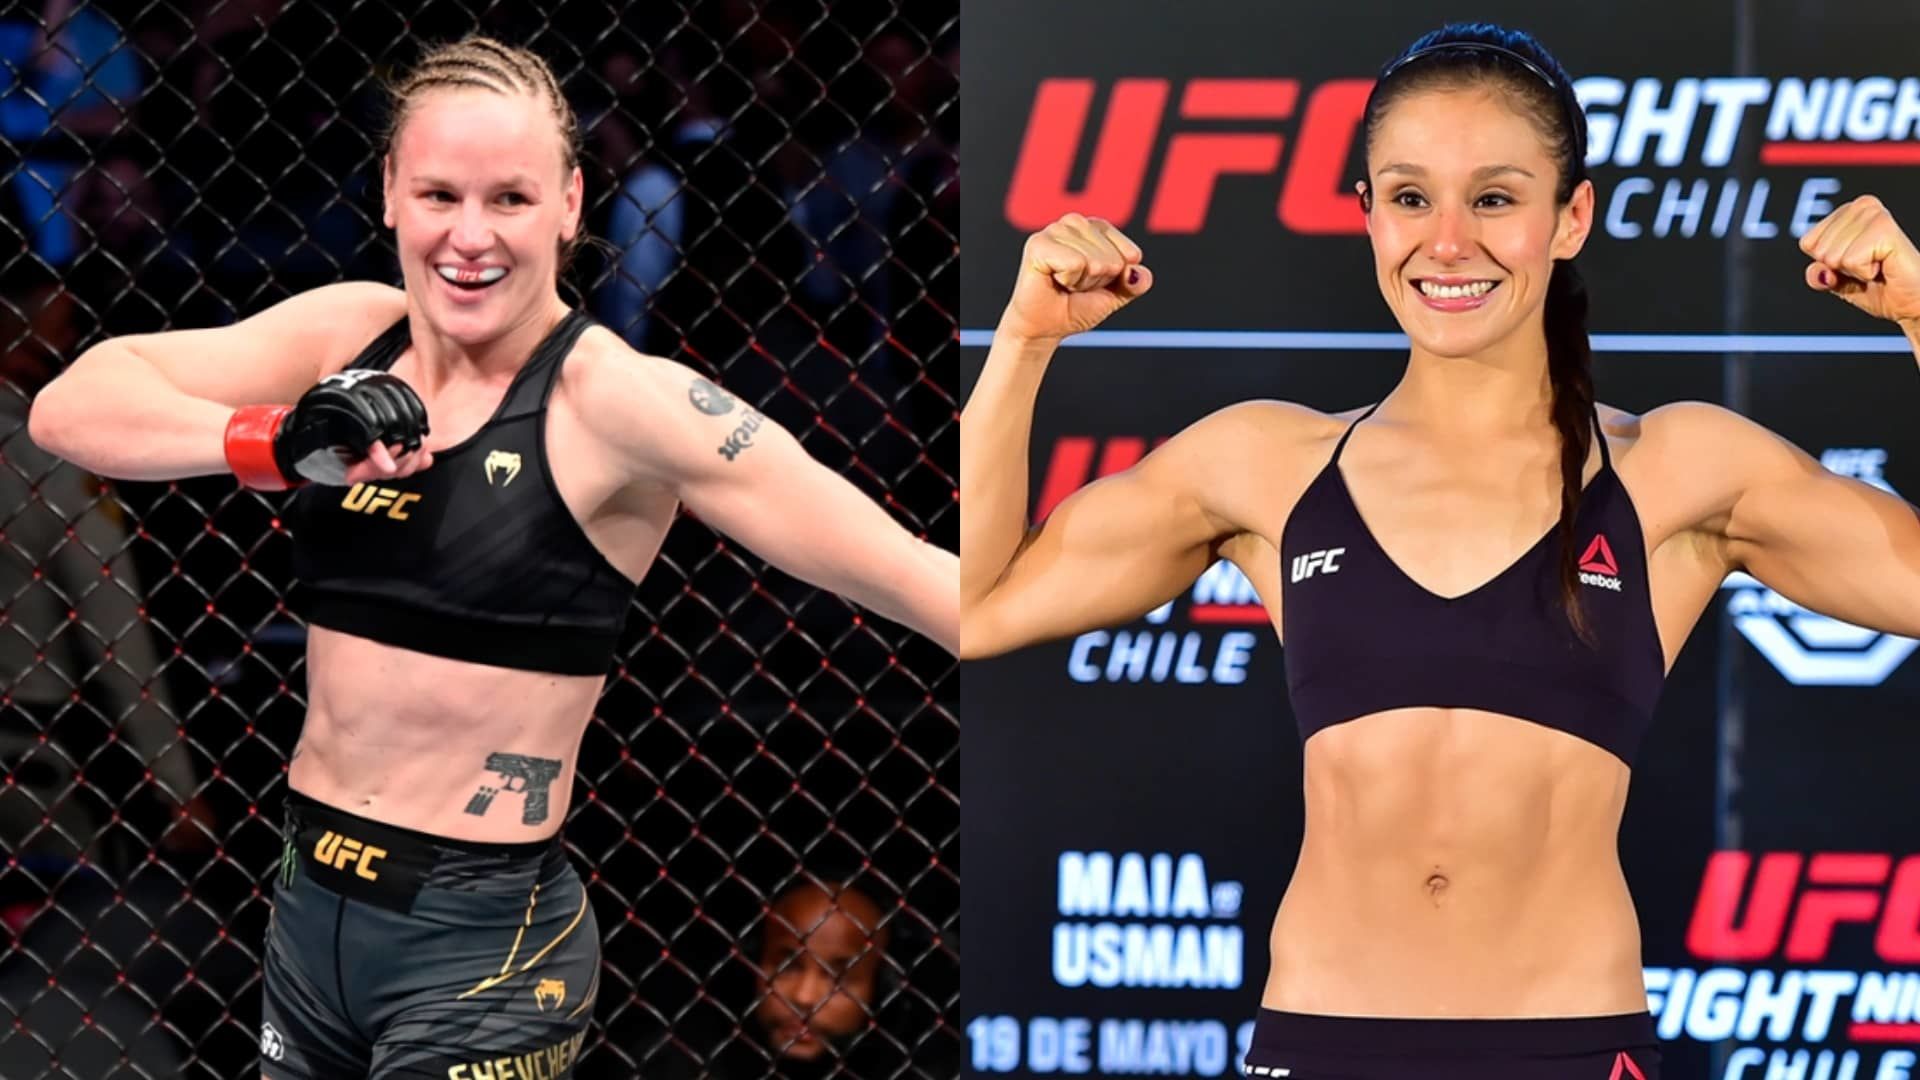 Shevchenko promises to use Grasso's fears in her fight at UFC 285